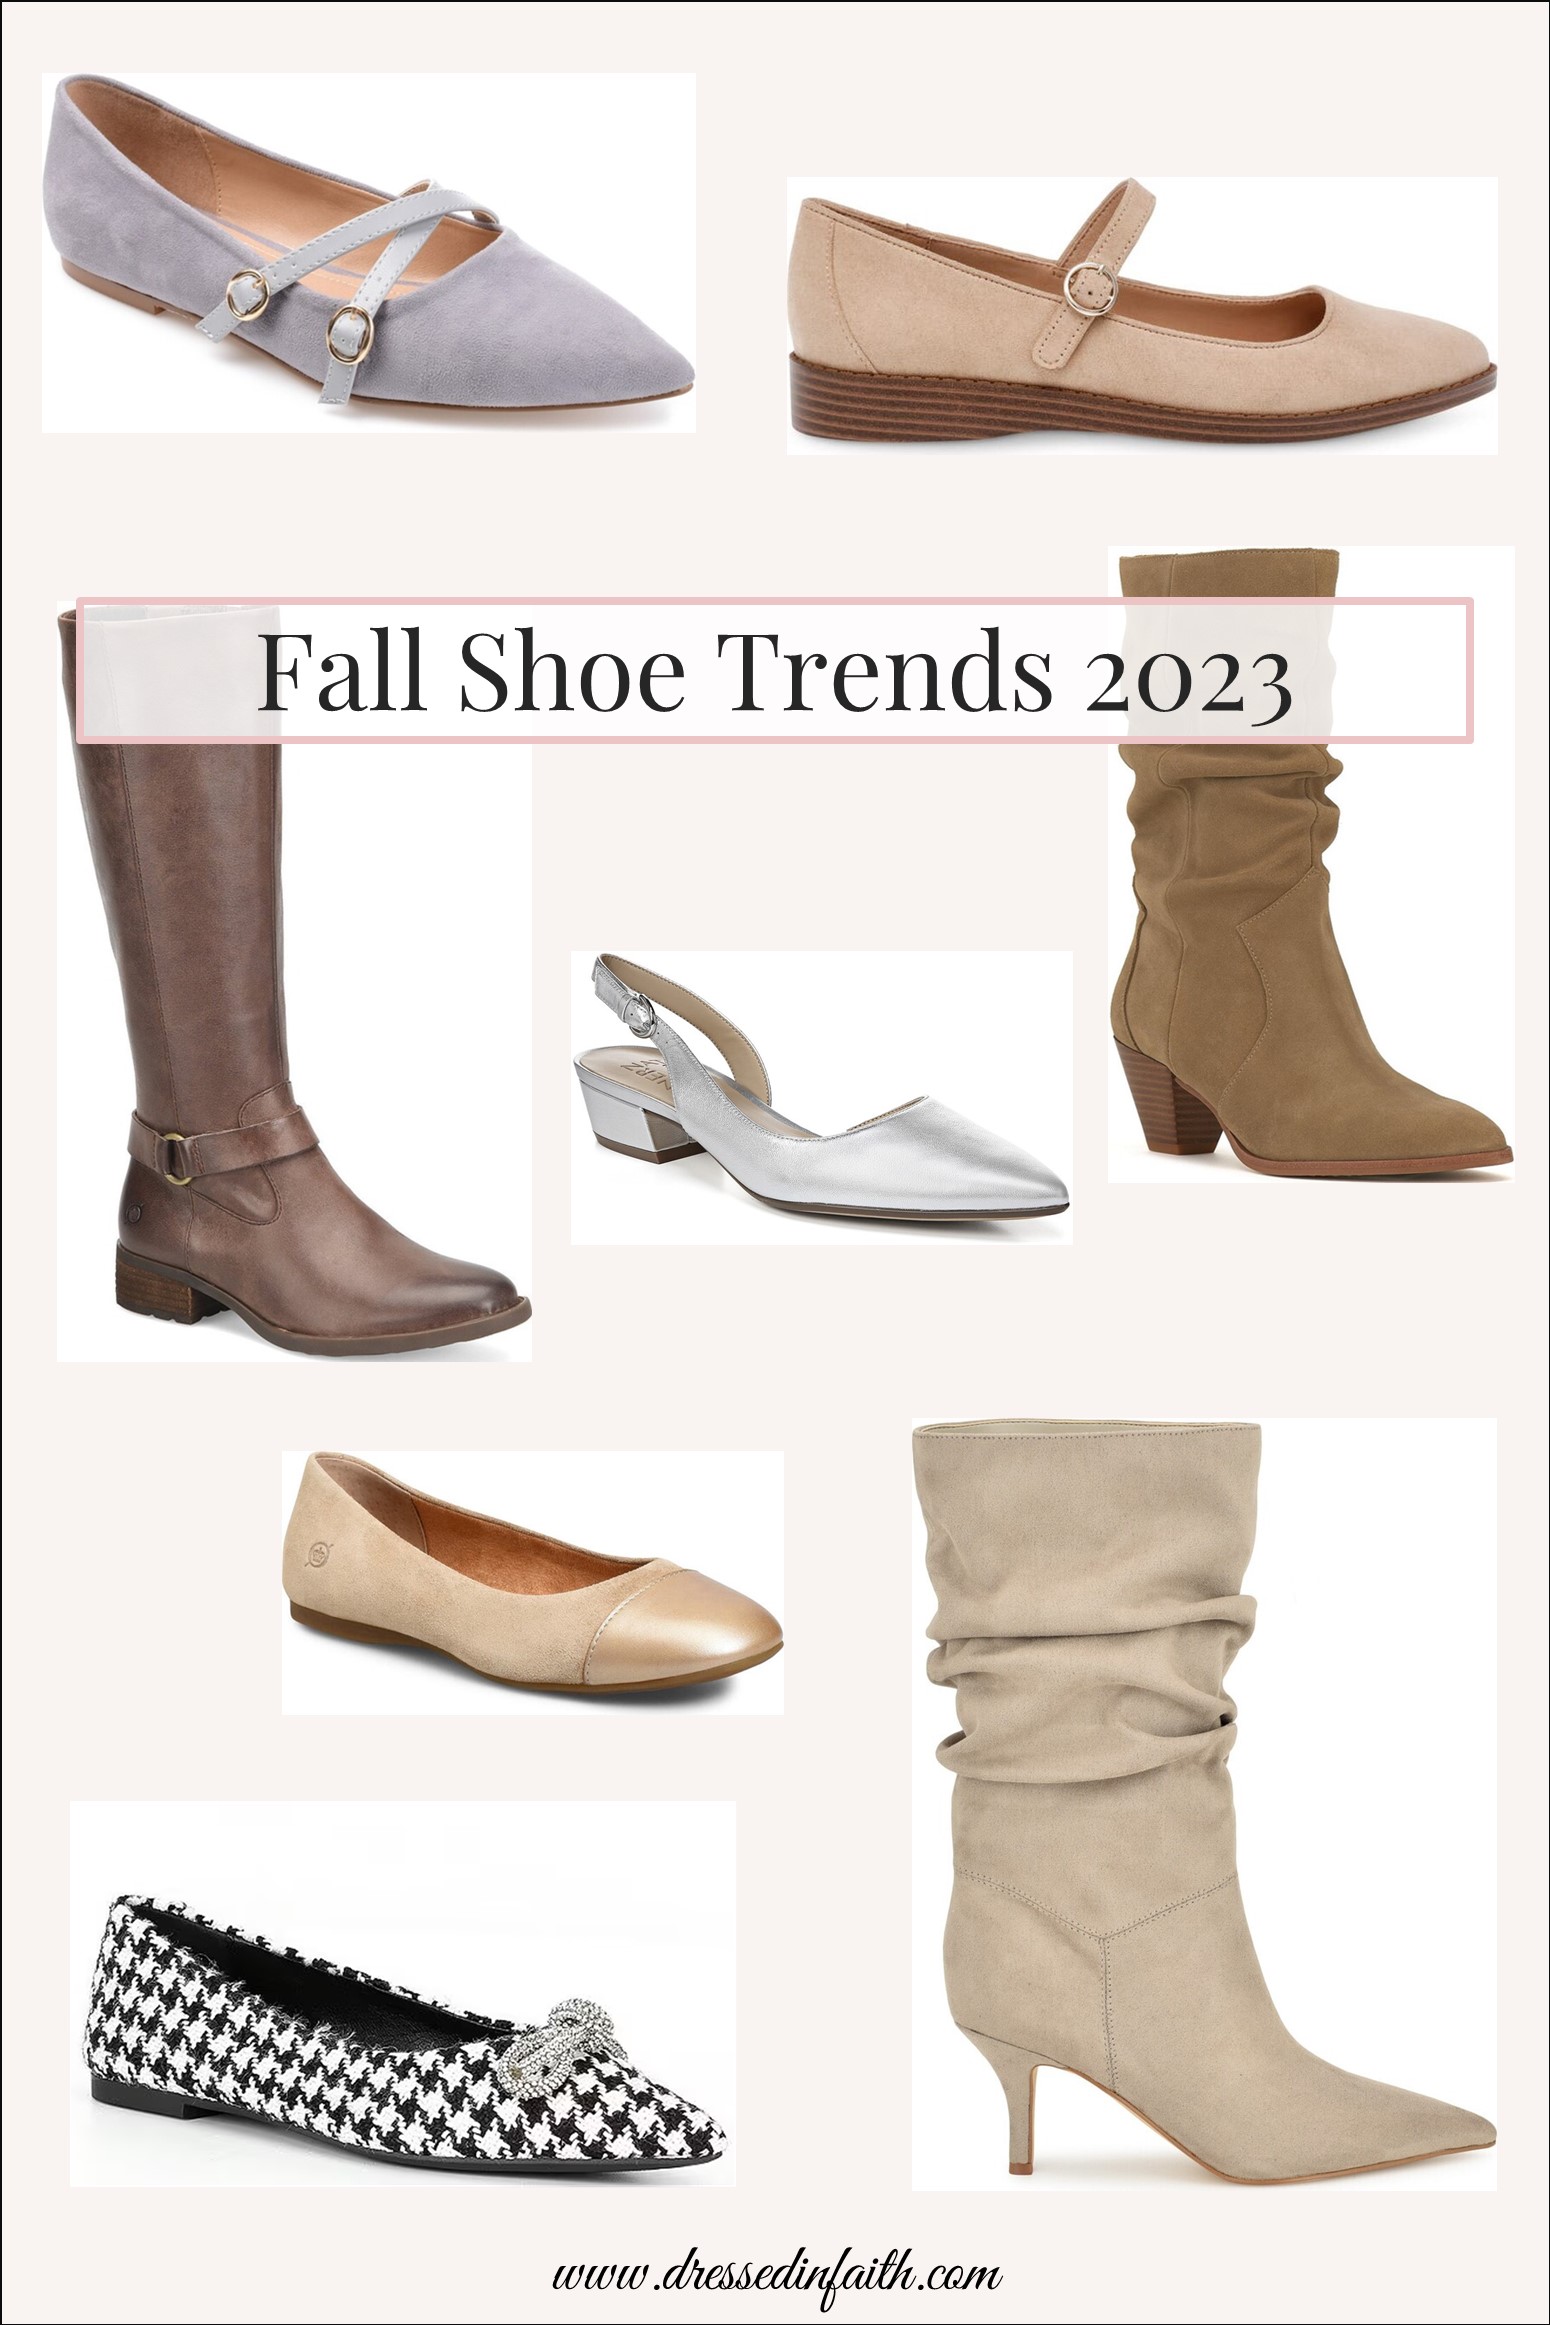 Fall Shoe Trends 2023 – Dressed in Faith